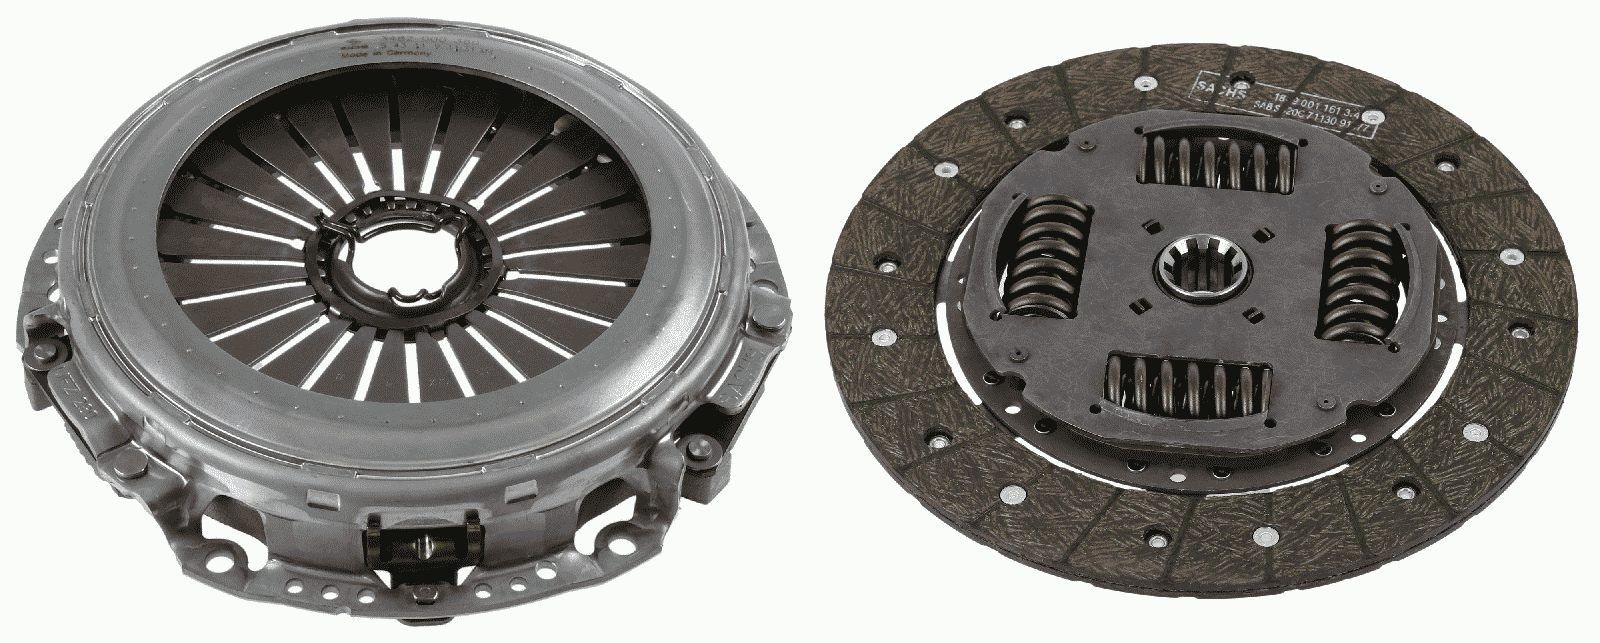 Nissan TRADE Clutch and flywheel kit 17384795 SACHS 3400 700 551 online buy